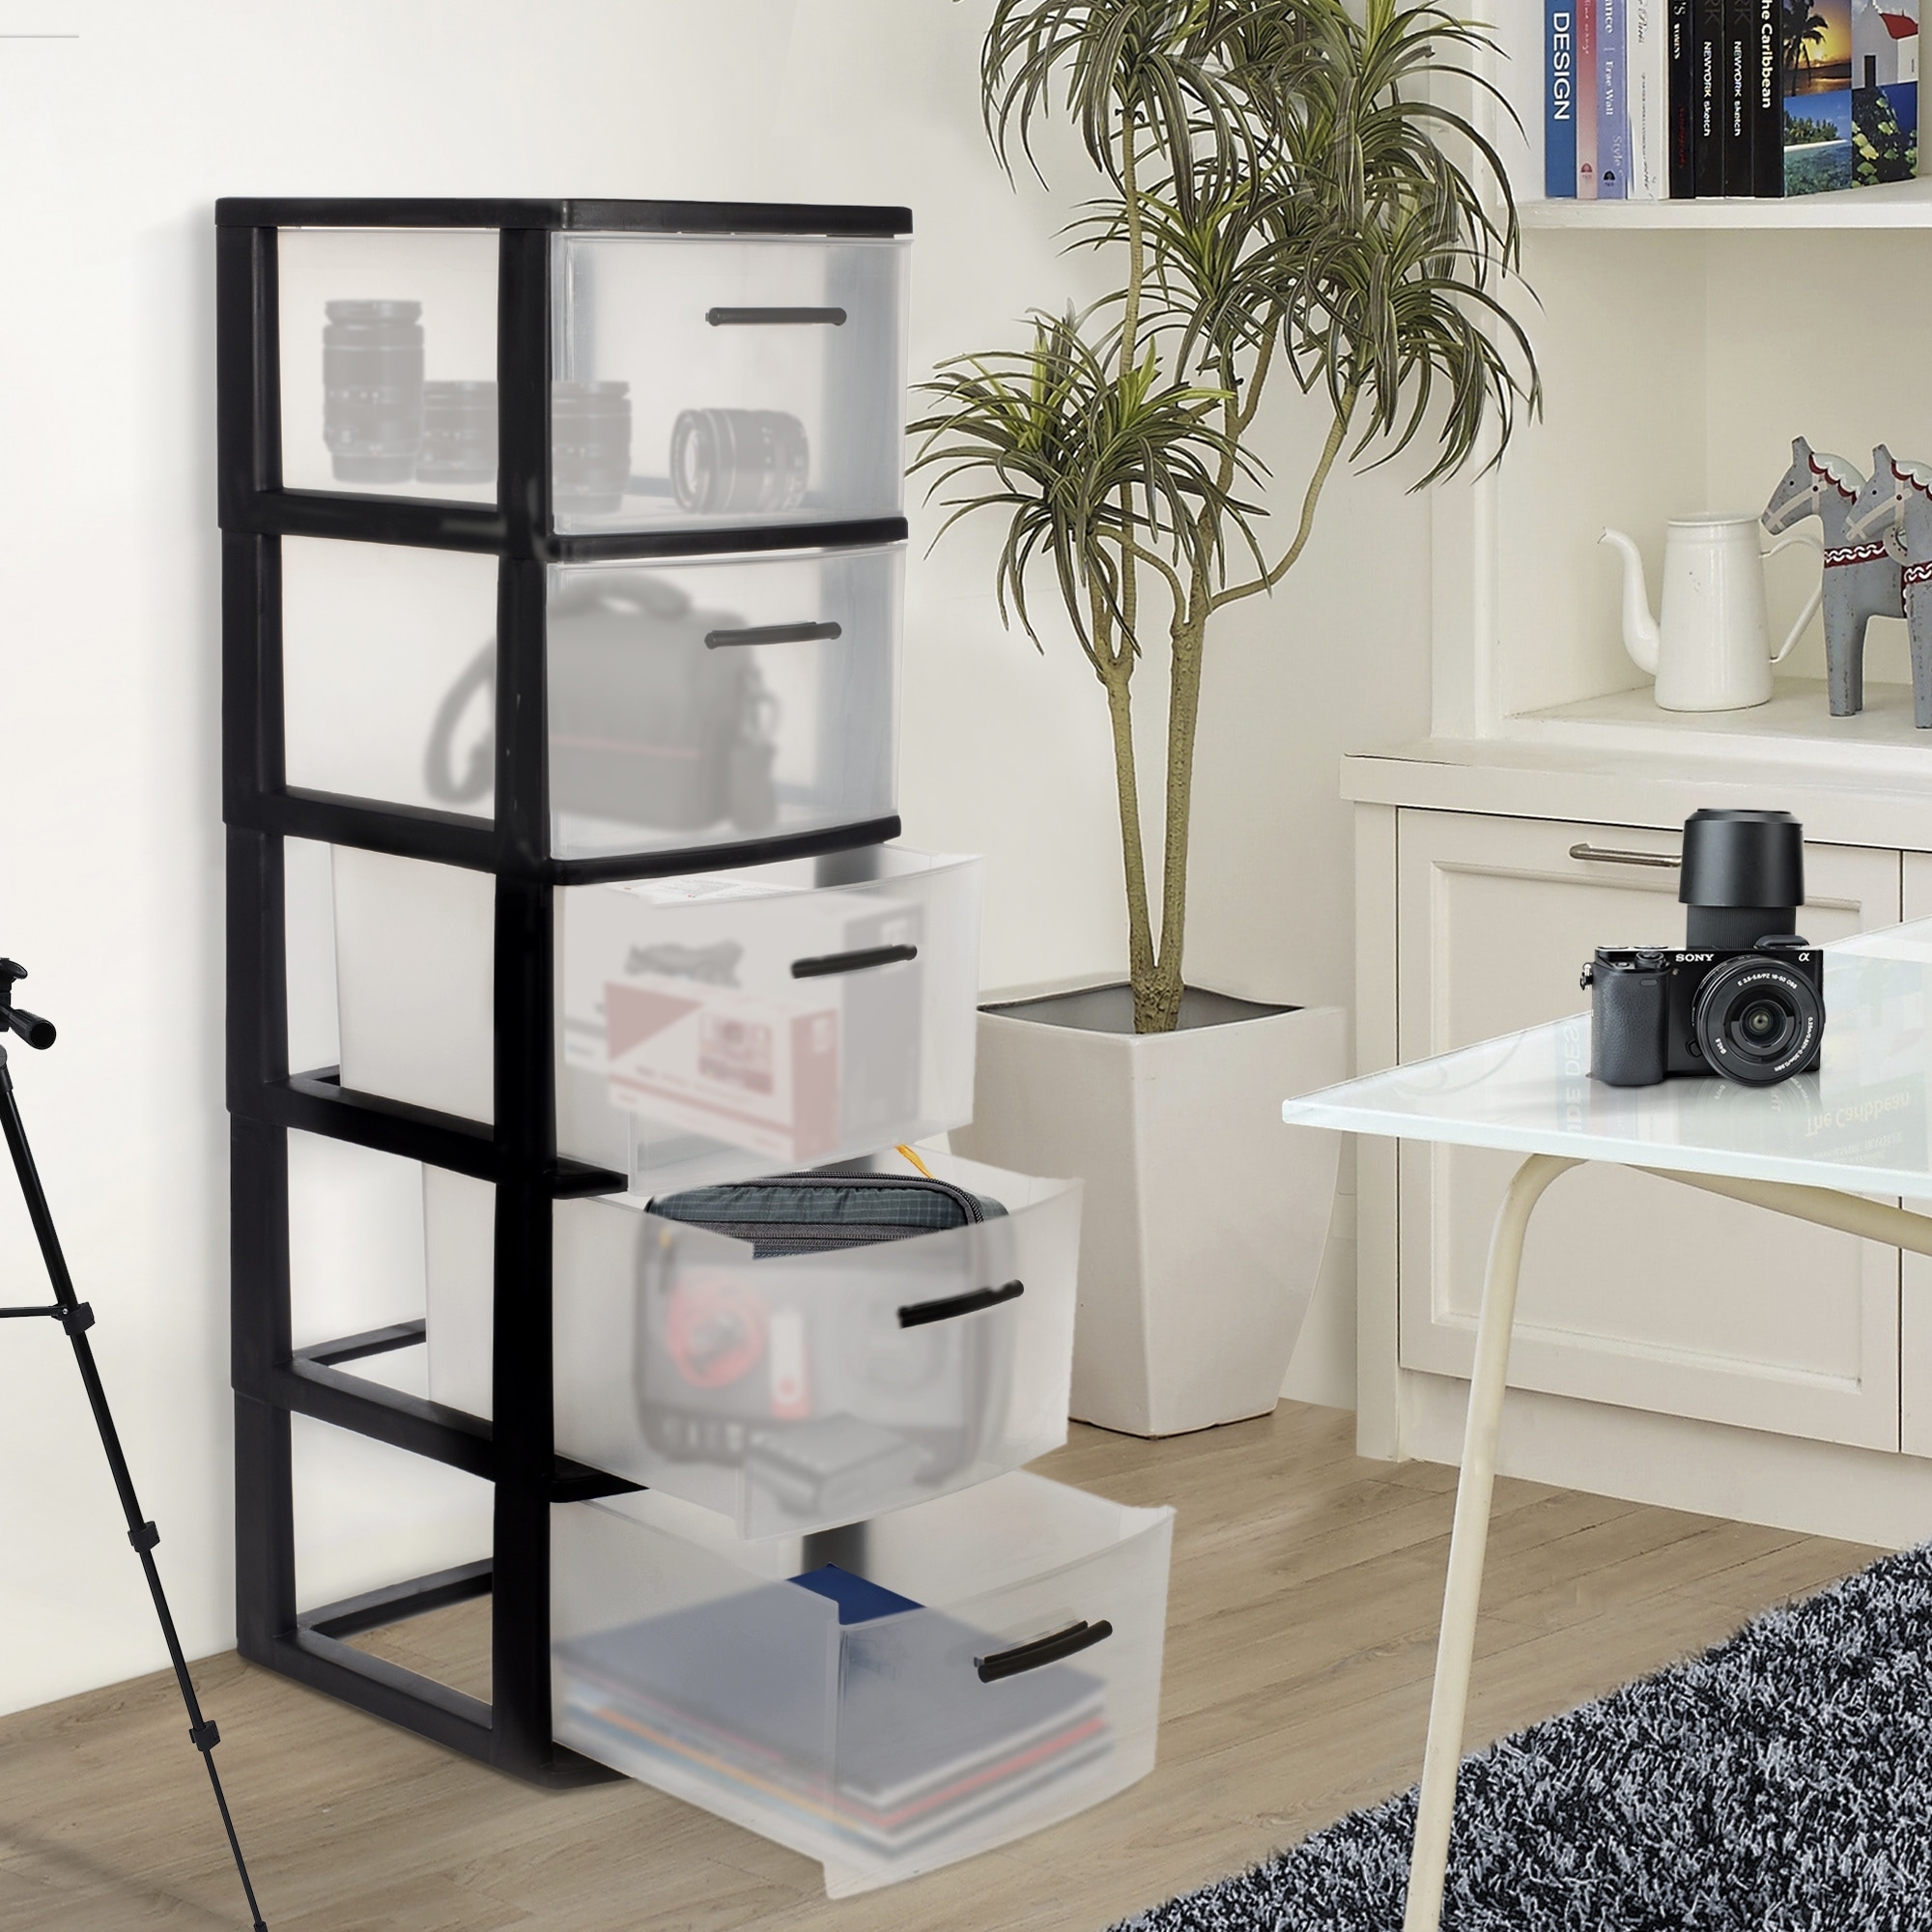 https://ak1.ostkcdn.com/images/products/is/images/direct/505fec7d2ffe6263331a0c9558e8f3a23ab7986d/MQ-Eclypse-5-Drawer-Plastic-Storage-Unit-with-Clear-Drawers-%282-Pack%29.jpg